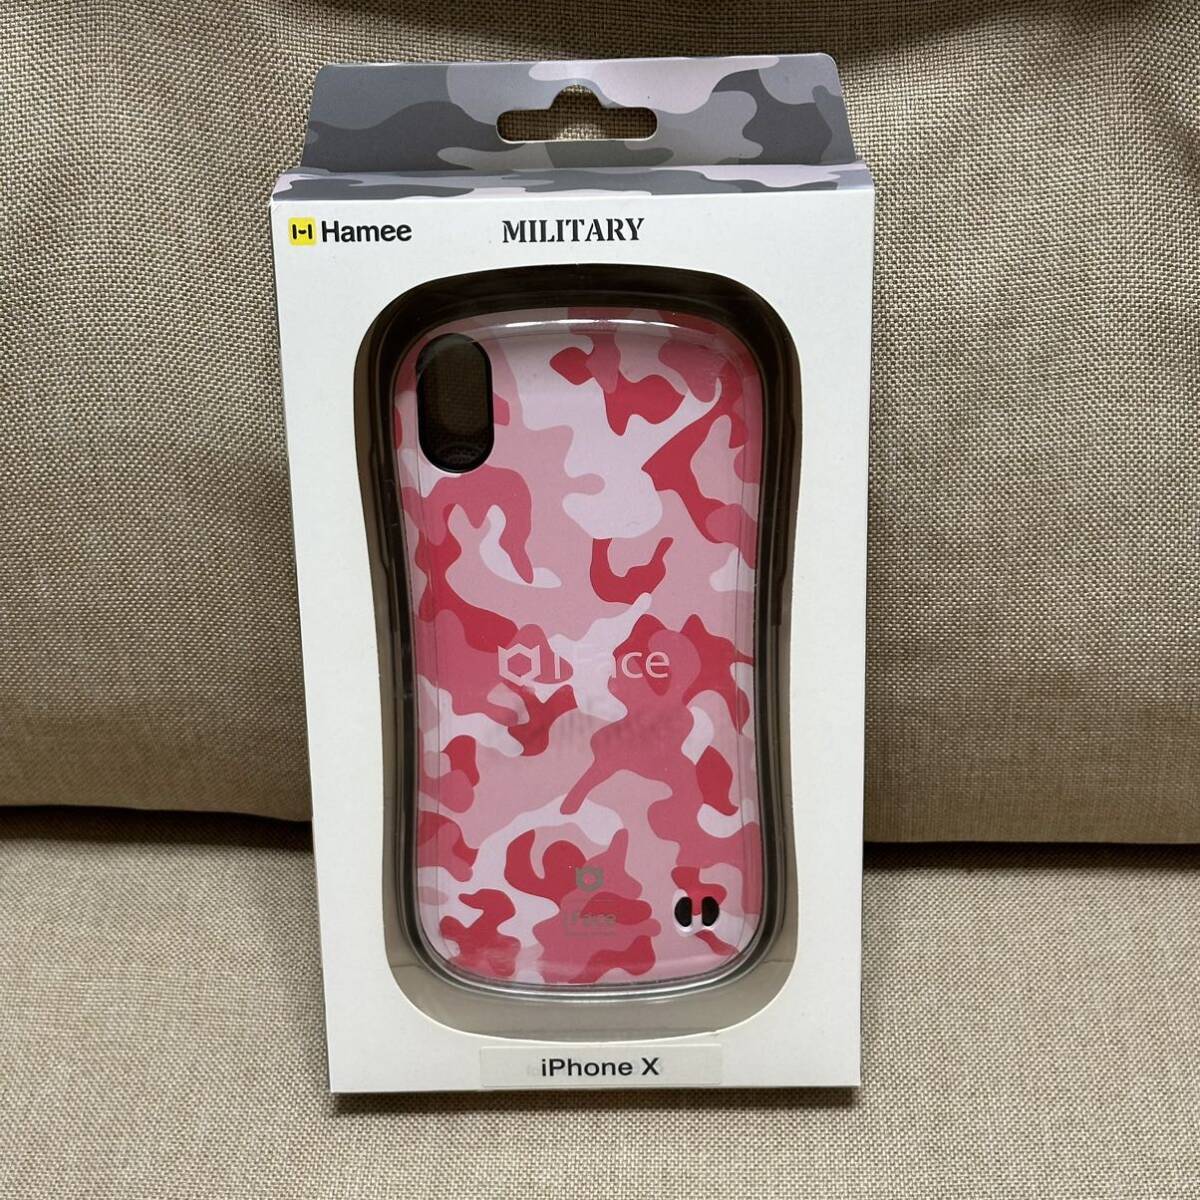 【OM240507-003】【未使用】 ハミィ iPhone X iFace First Class Military Pink アイフェイス ファーストクラス ピンク アウトレット品